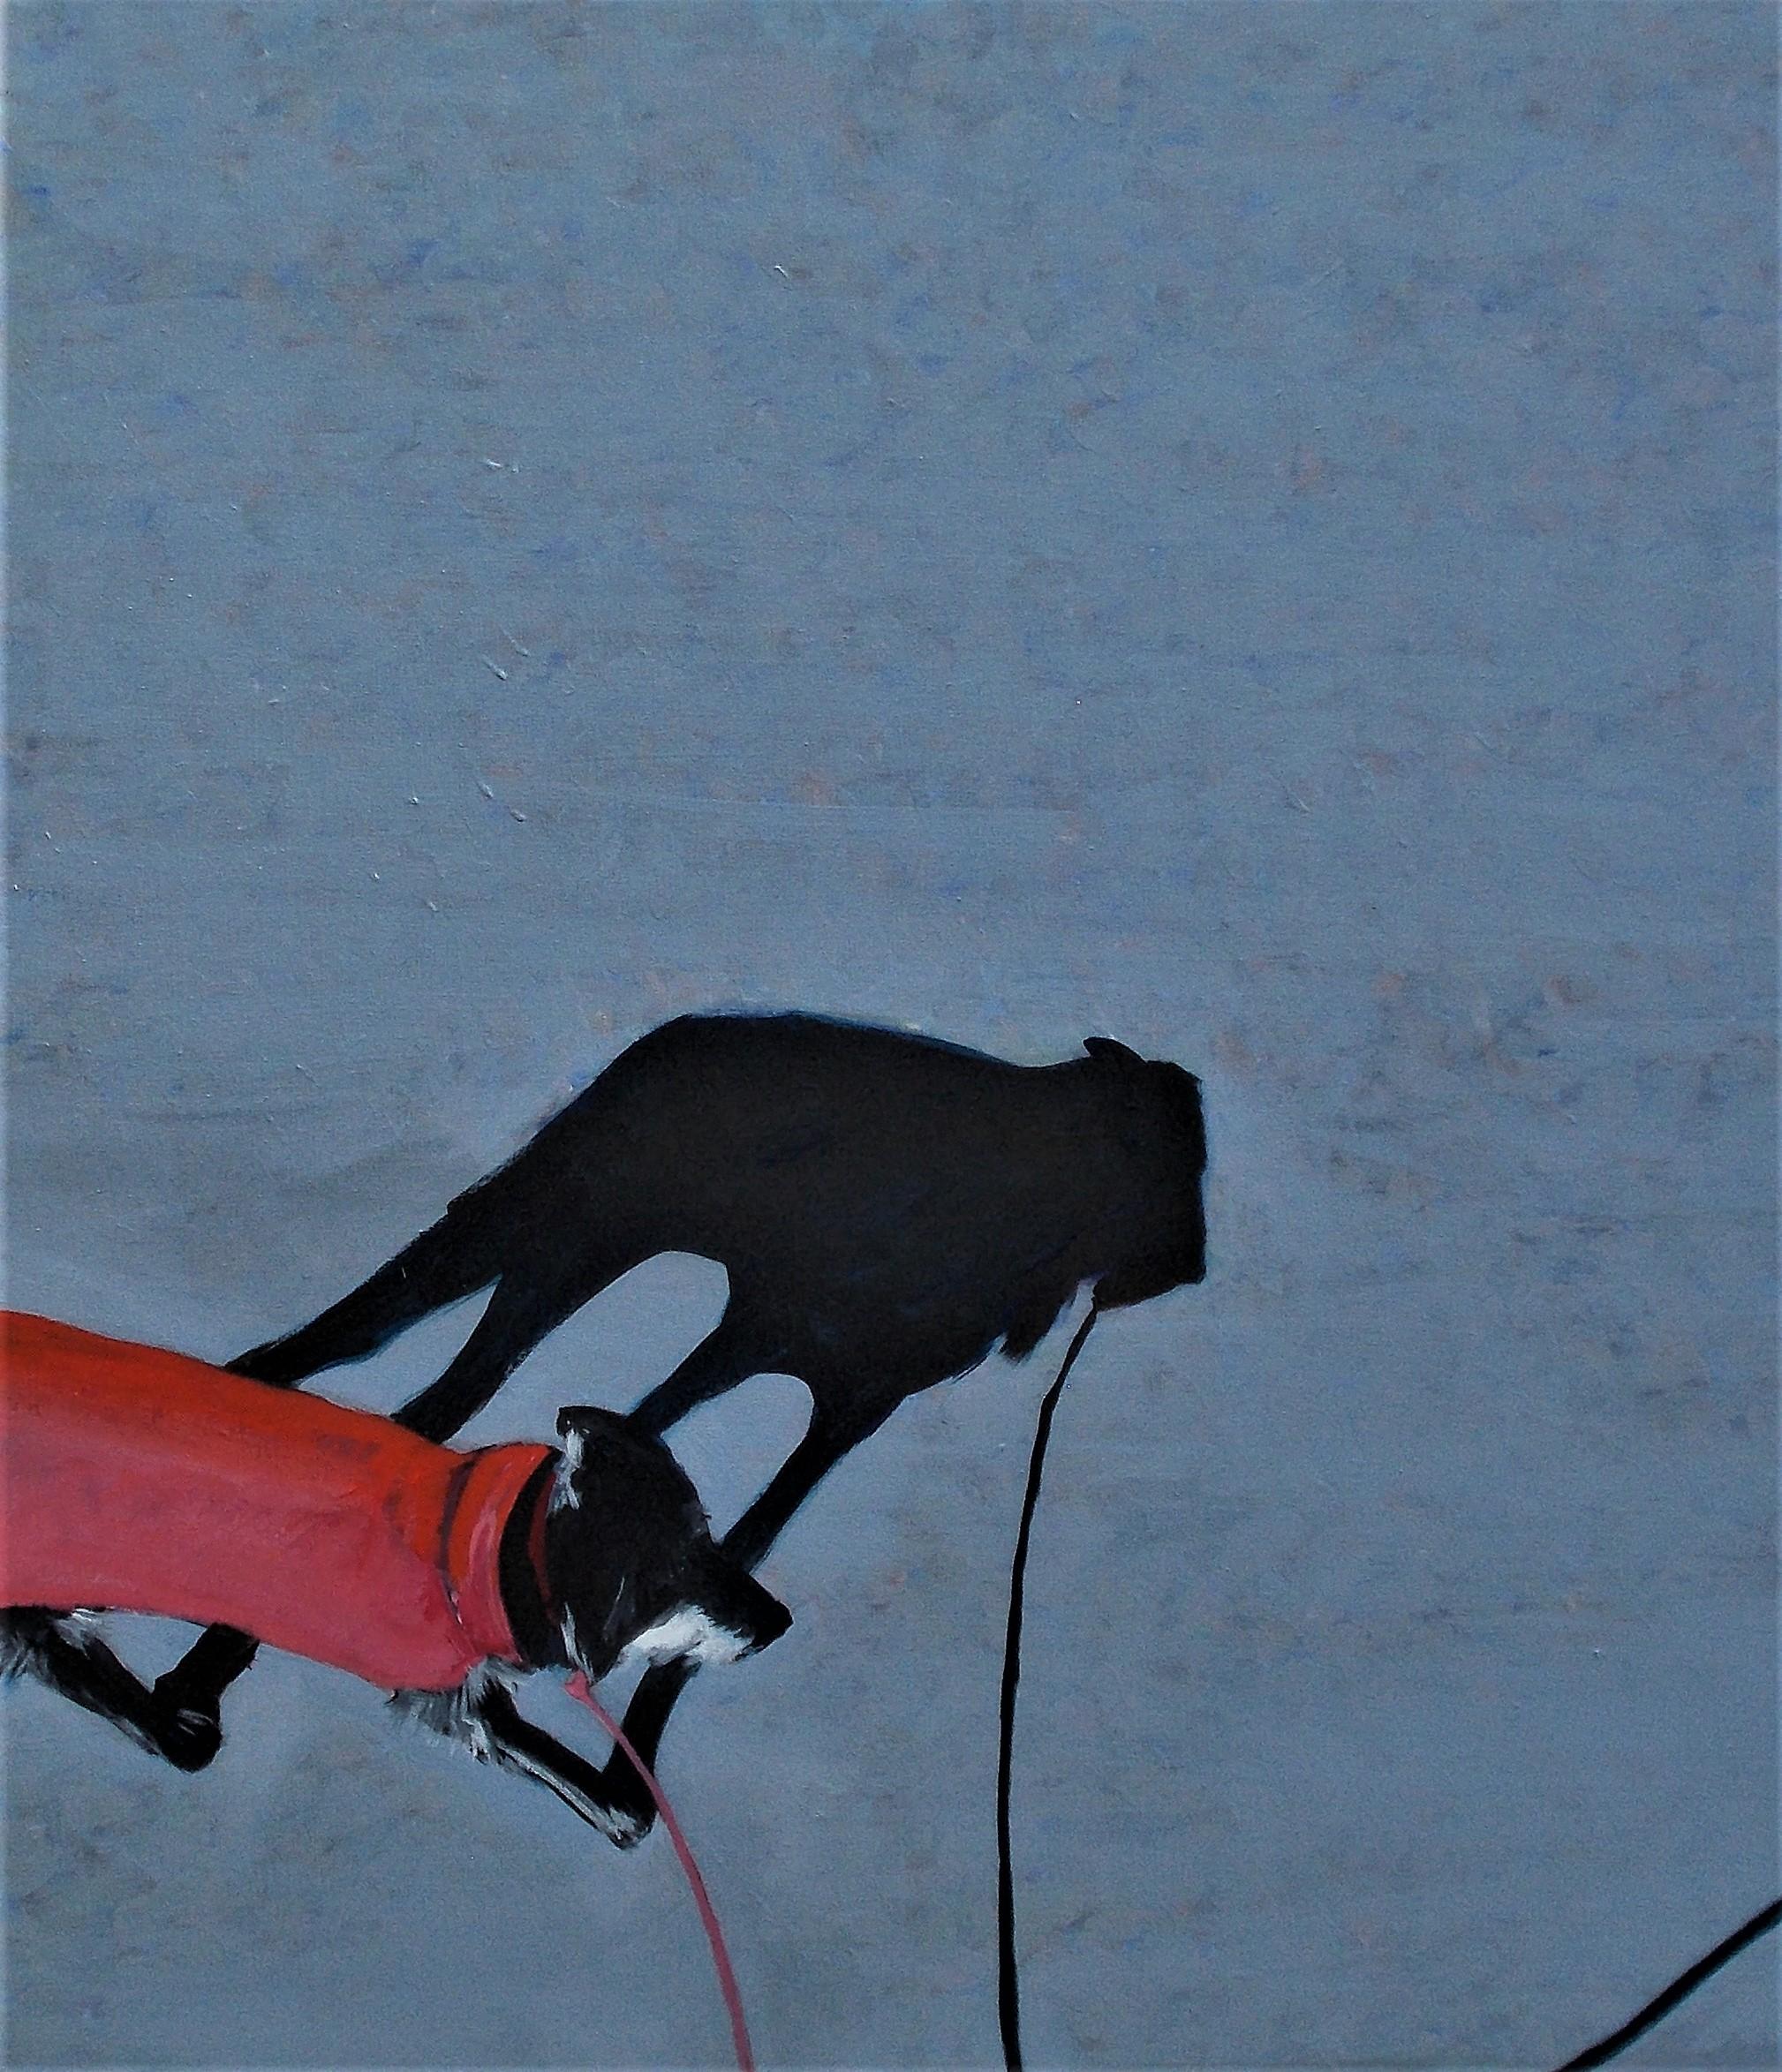 <p>Artist Comments<br>Artist Benjamin Thomas paints an impressionist view of a man walking his dog, casting shadows on the pavement. The pup dons a red winter coat as he treads the snowy path, happy to get home and warm. Bright sunlight defines the